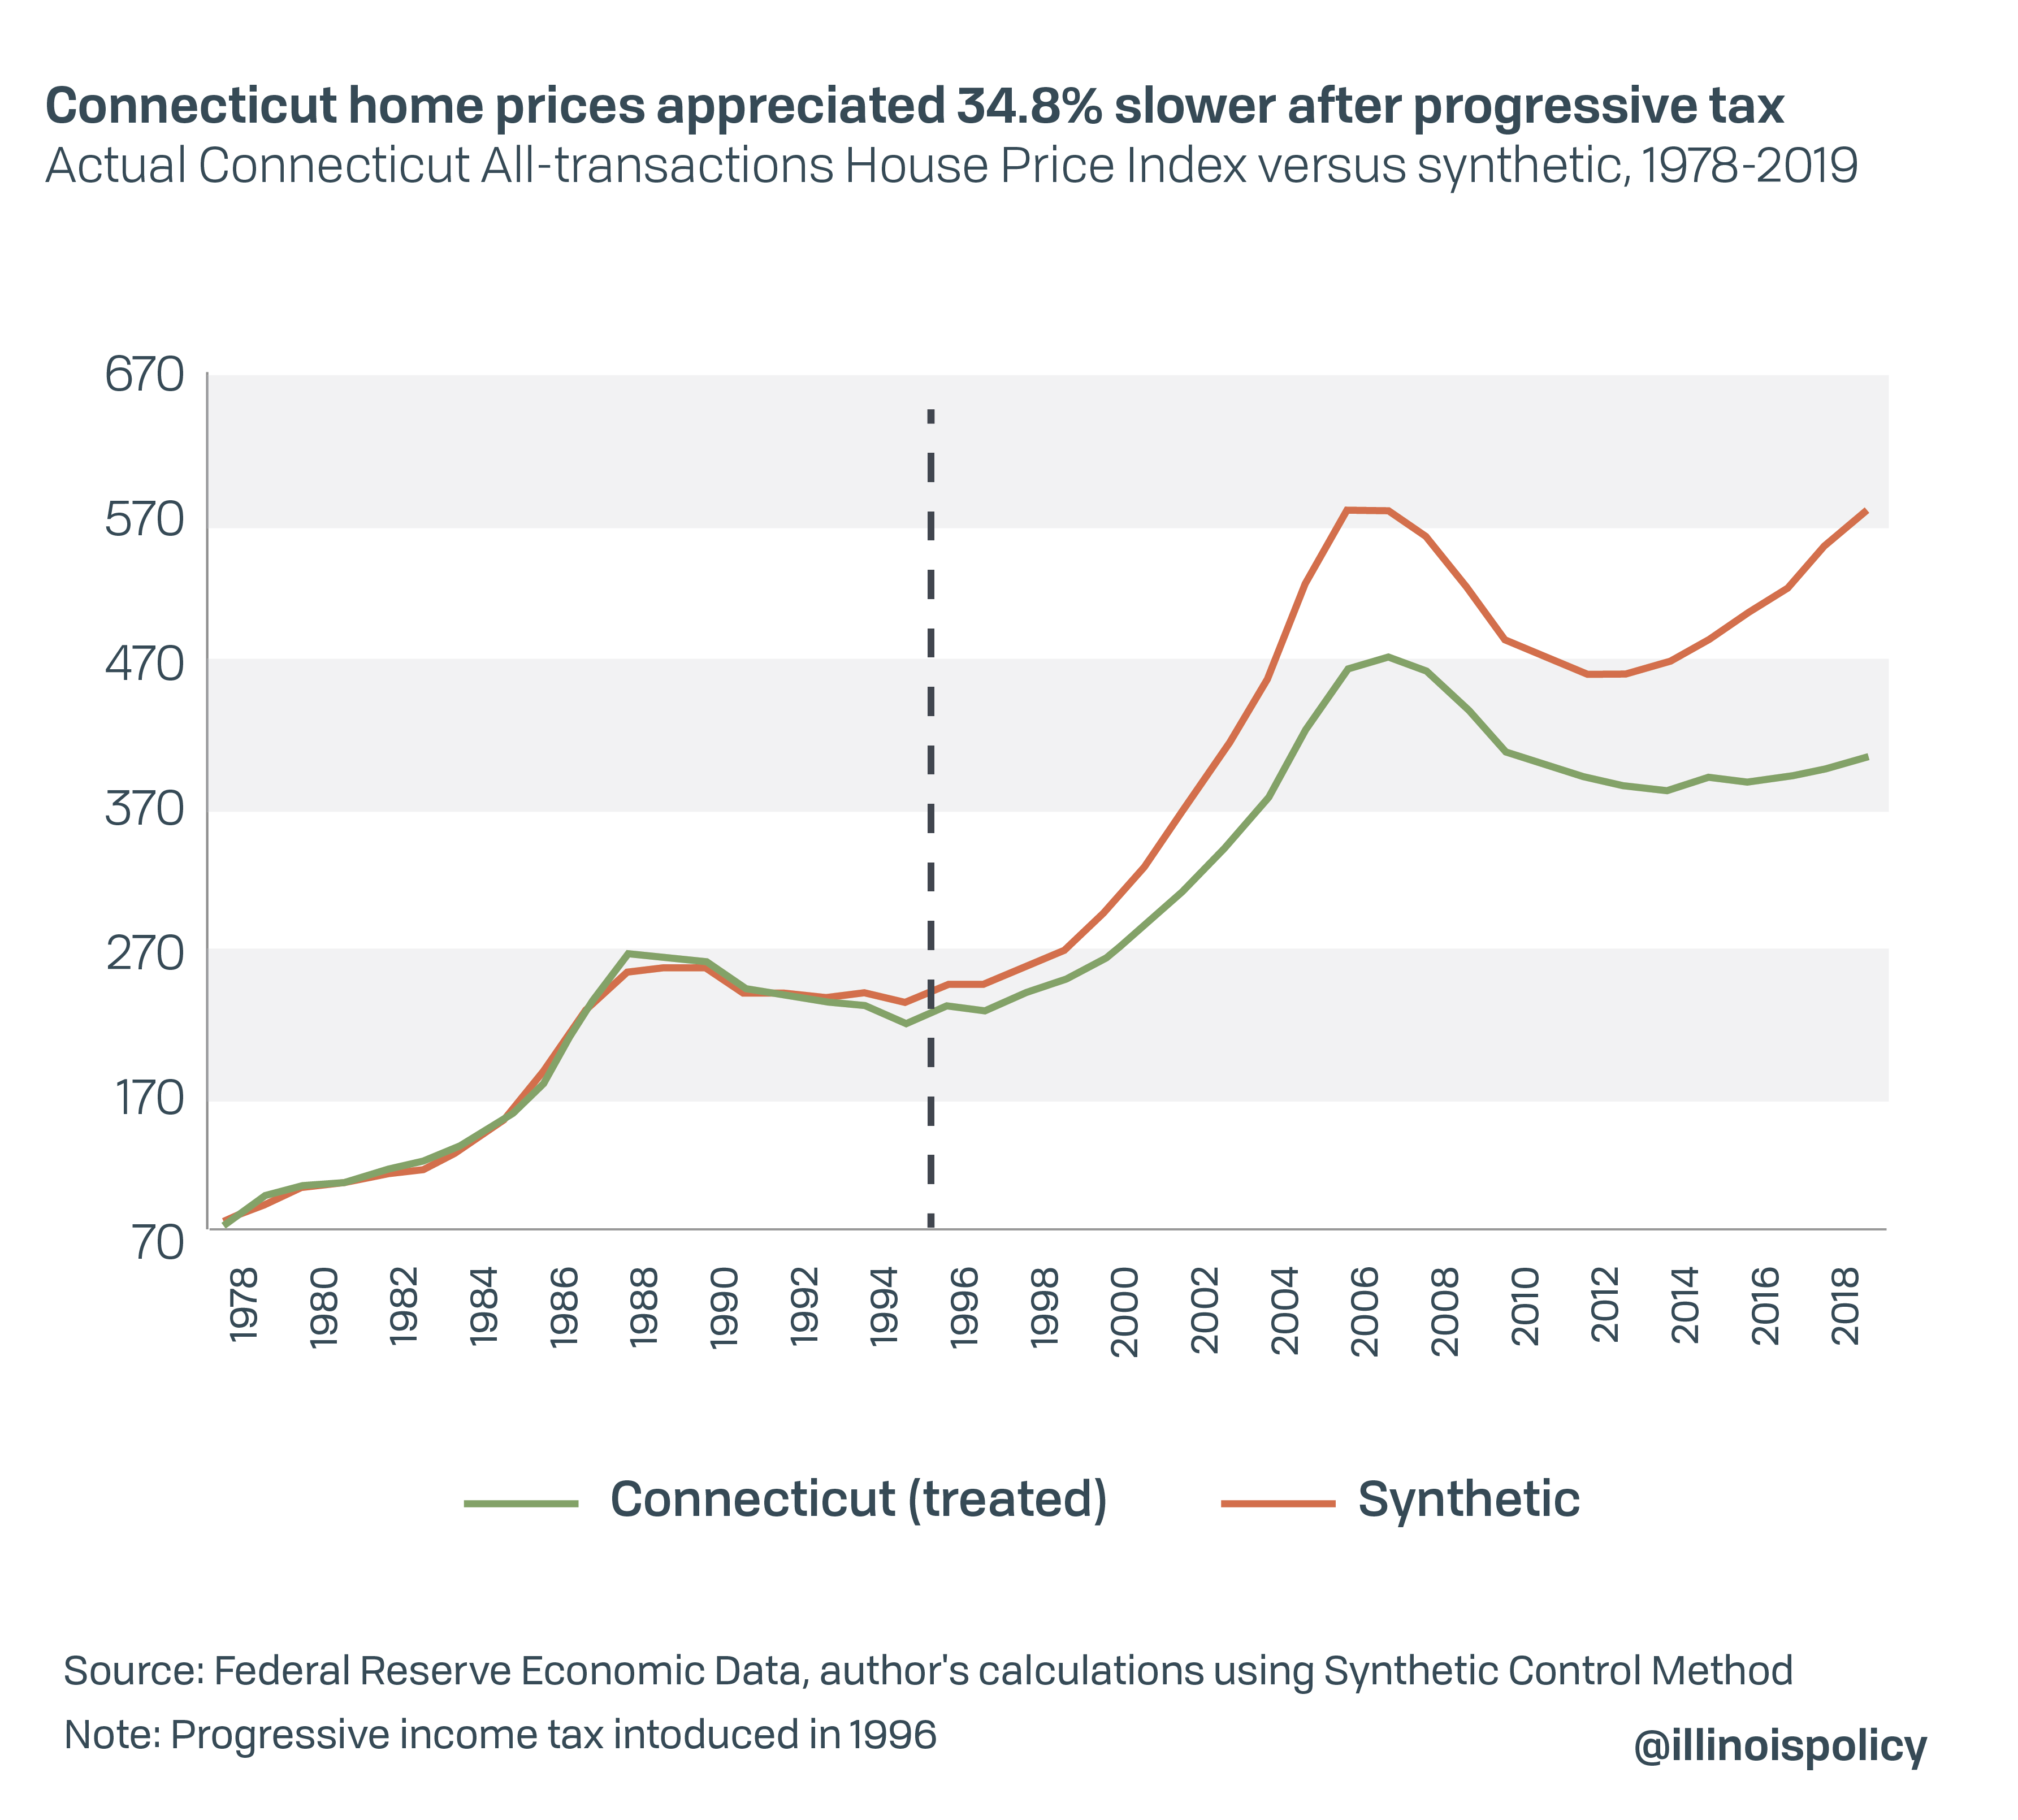 Connecticut home prices appreciated 34.8% slower after progressive tax